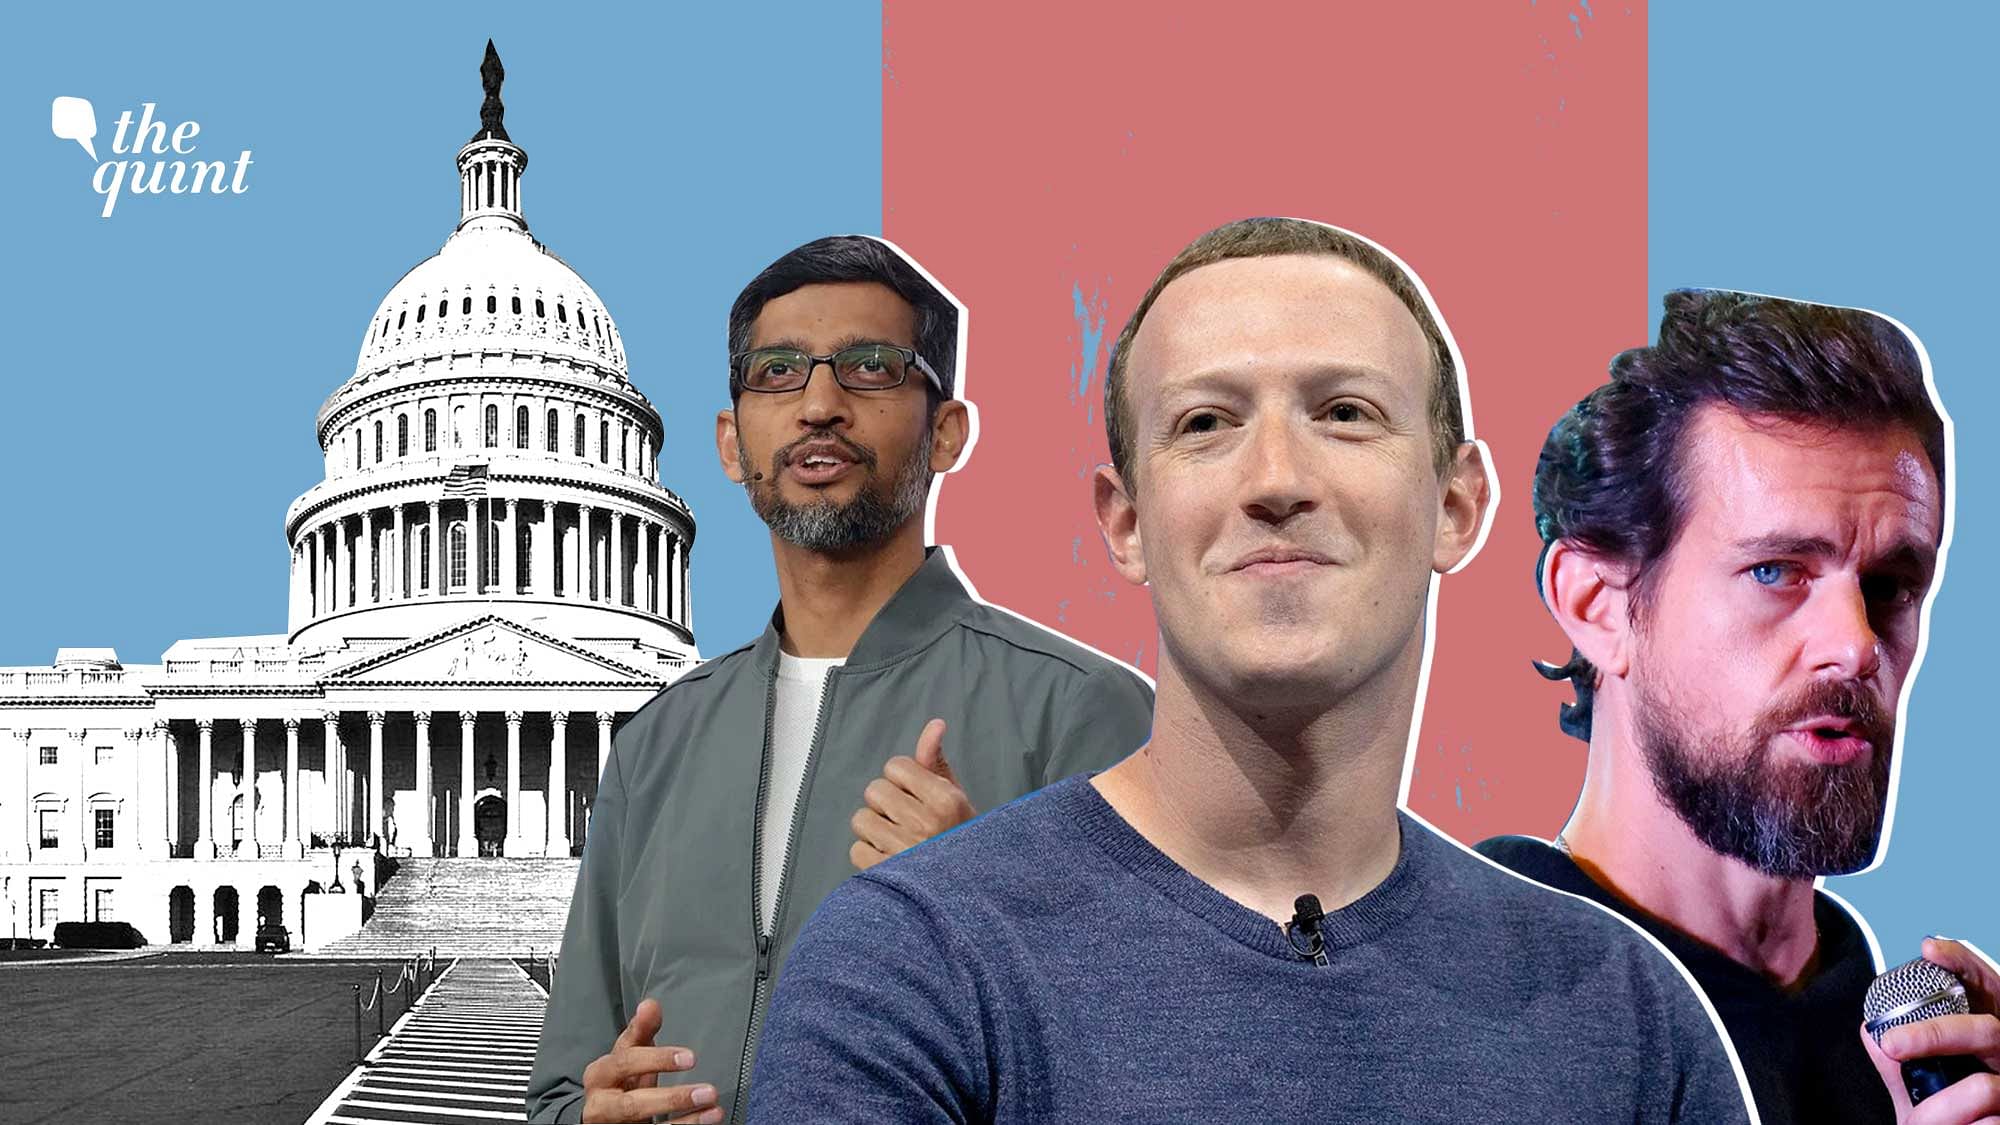 Six days before the Presidential election, on Wednesday 28 October, the CEOs of Facebook, Google and Twitter will testify before the US Congress on a range of  issues related to moderation of content on social media platforms.